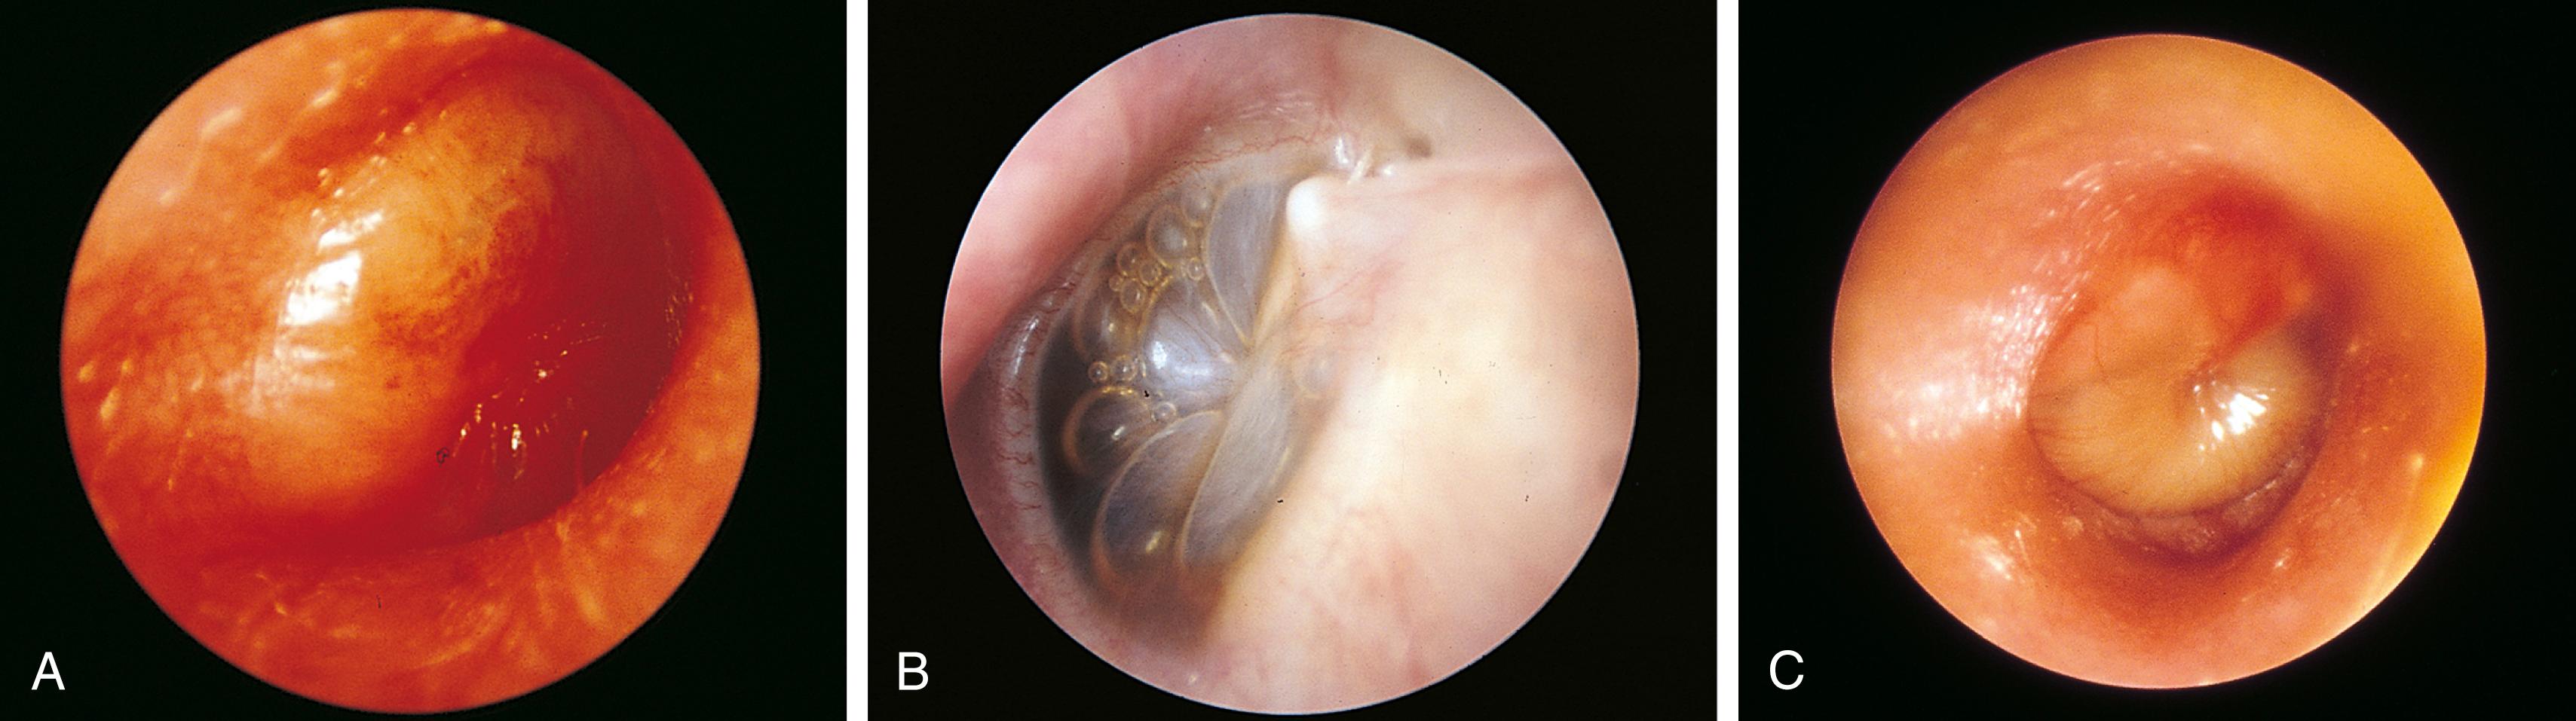 Fig. 24.24, Acute otitis media. (A) This is the textbook picture—an erythematous, opaque, bulging tympanic membrane. The light reflex is reduced, and the landmarks are partially obscured. Mobility is markedly reduced. (B) In this acutely febrile child who complained of otalgia, the presence of both air and fluid formed bubbles separated by grayish-yellow menisci. Even though the drum was not injected, this finding, combined with fever and otalgia, is consistent with acute infection. (C) In this child, the tympanic membrane was injected at the periphery, and a yellow purulent effusion caused the inferior portion to bulge outward. Mobility was markedly reduced.